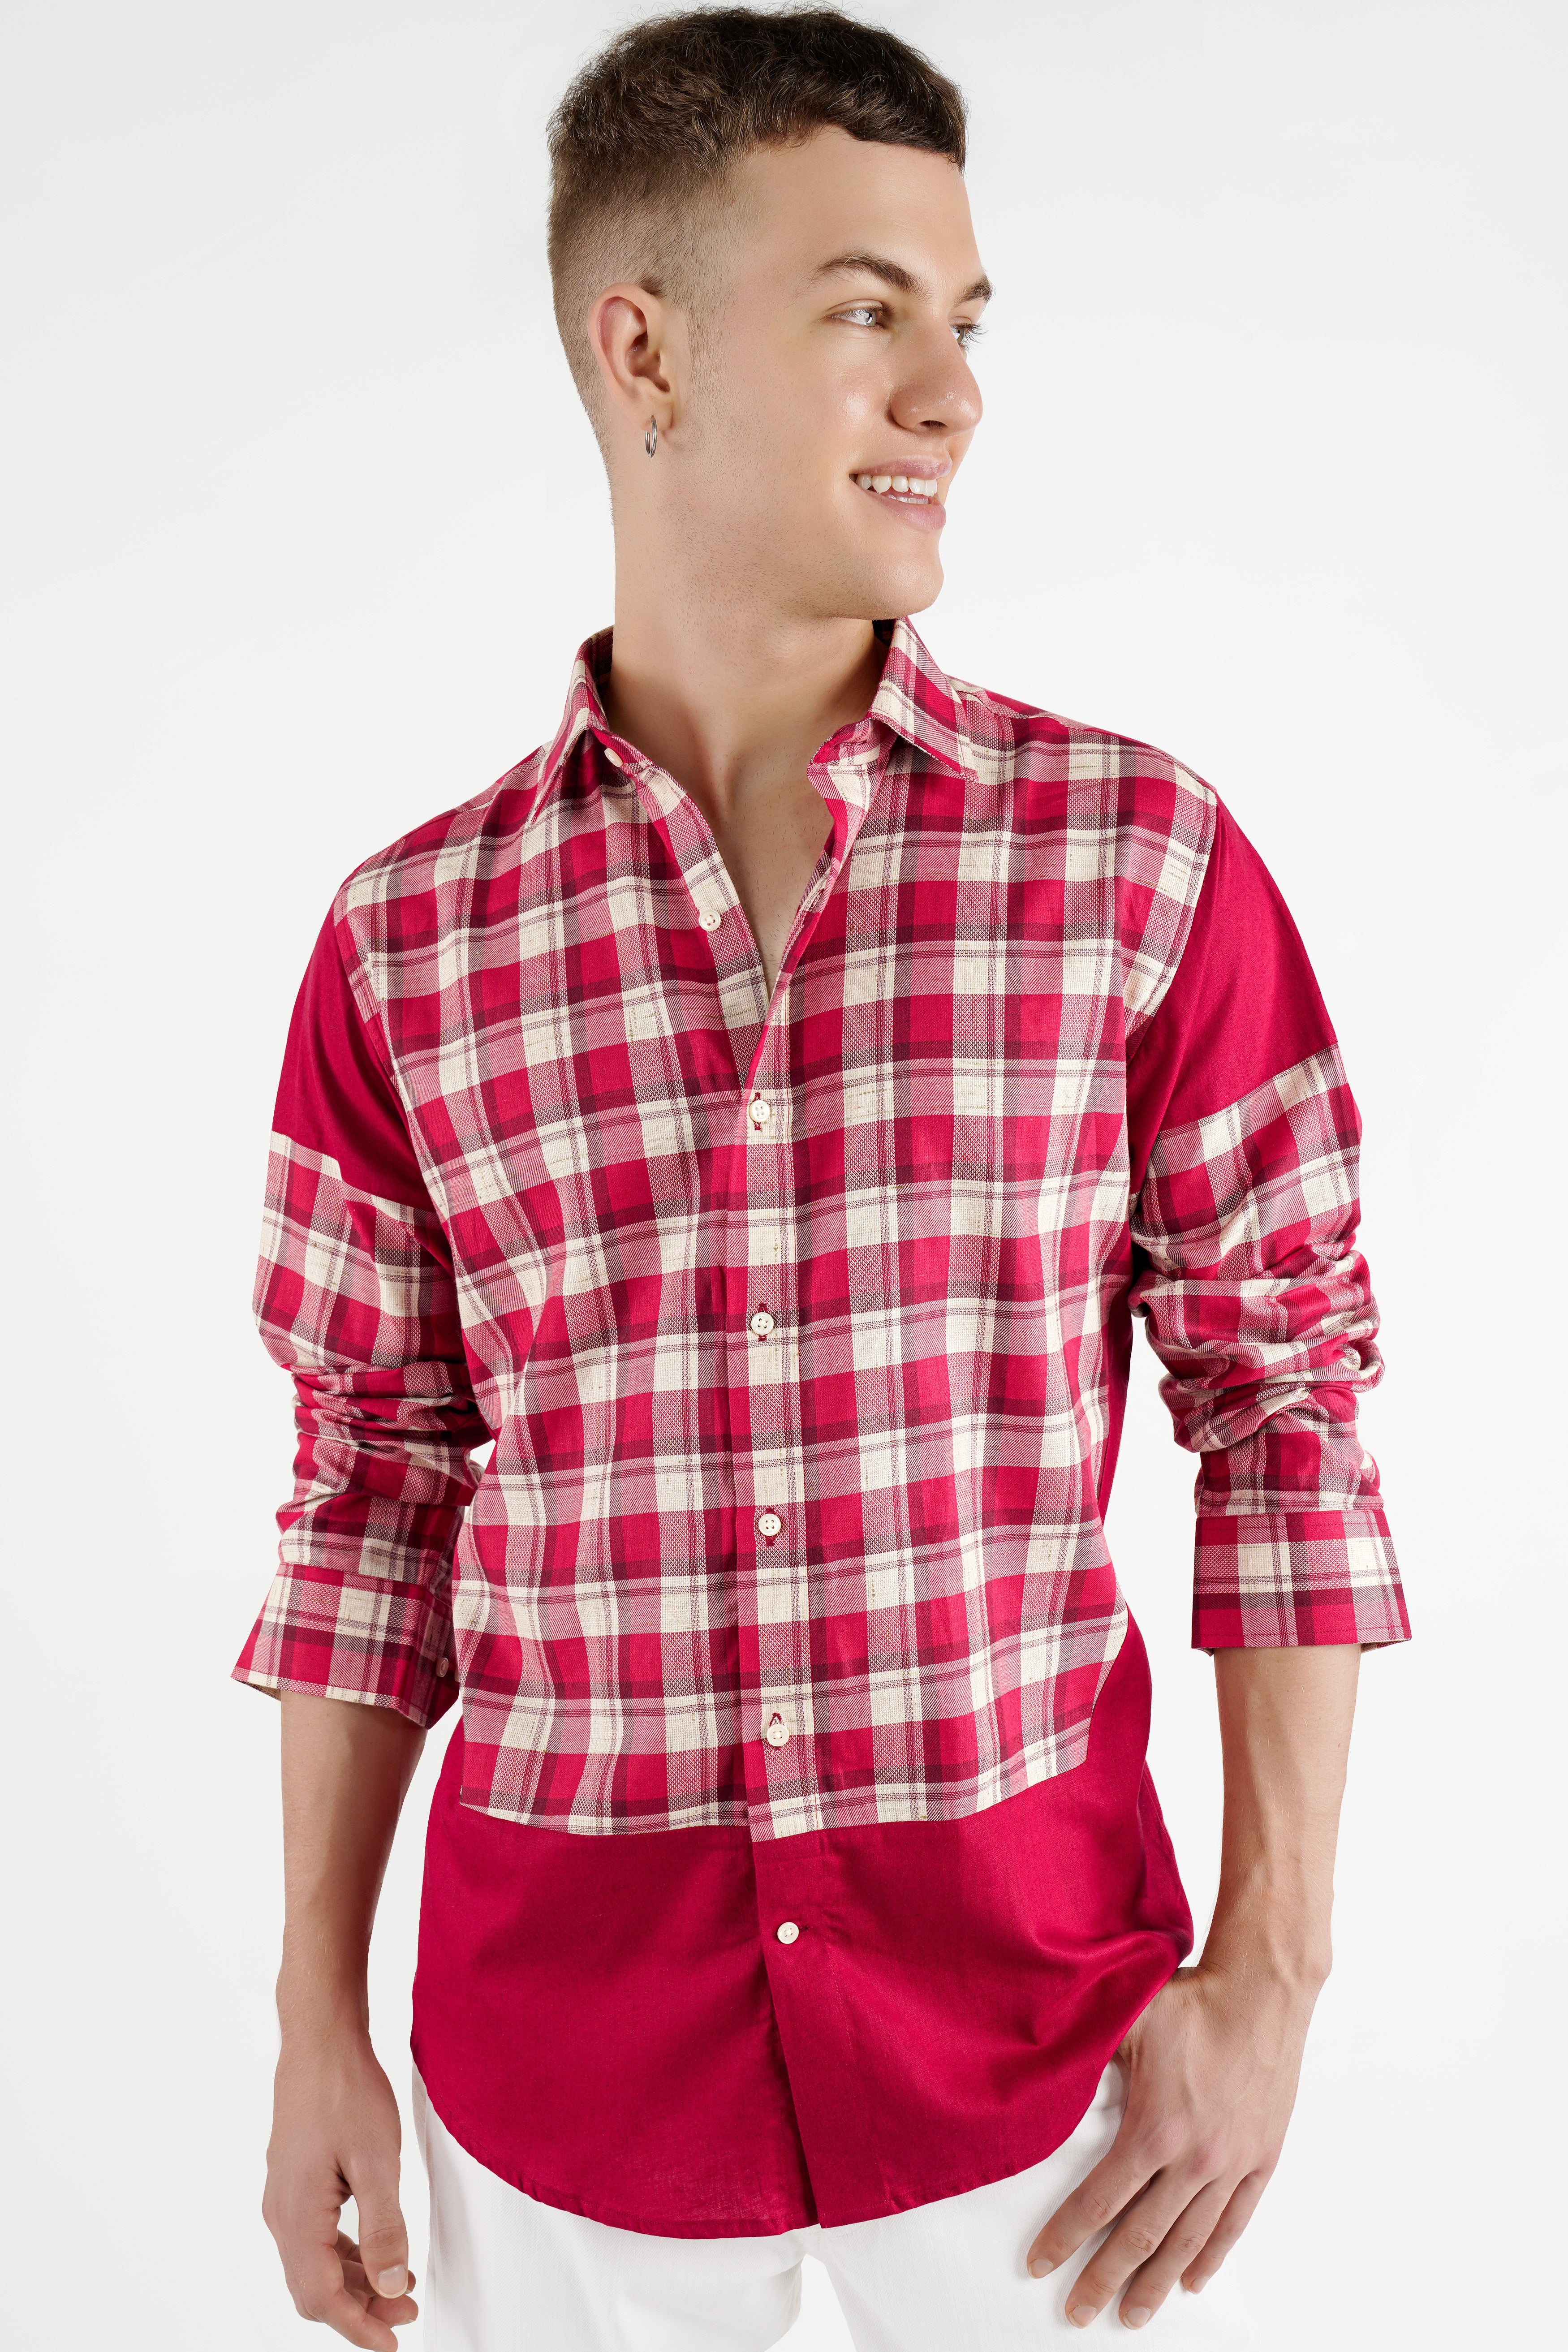 Cardinal Red and White Checkered with Funky Printed Dobby Designer Shirt